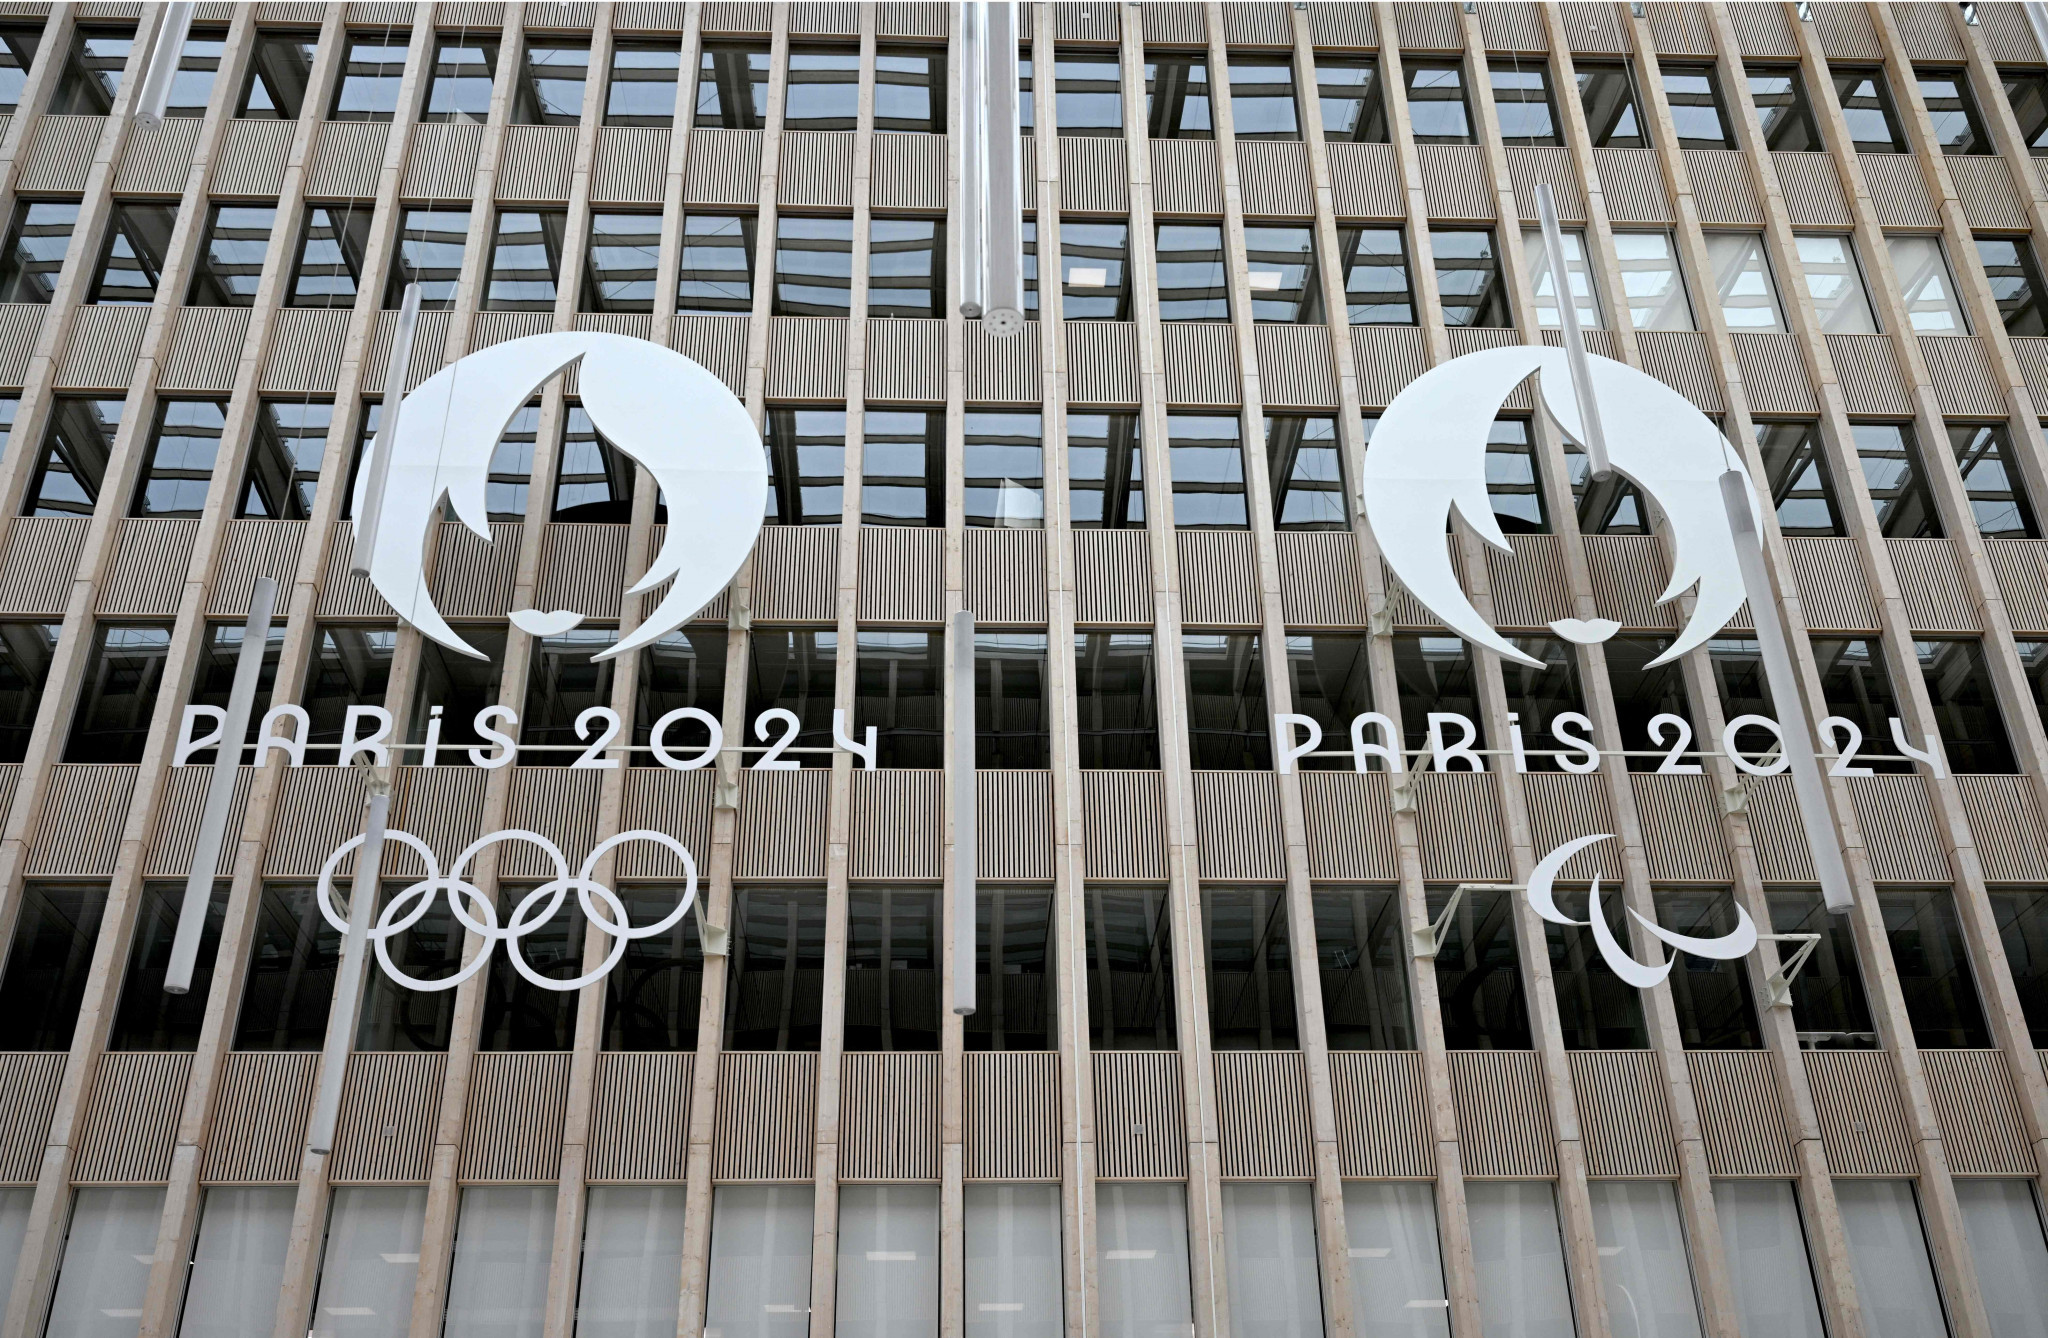 There are now less than two years until the Paris 2024 Olympics and Paralympics ©Getty Images